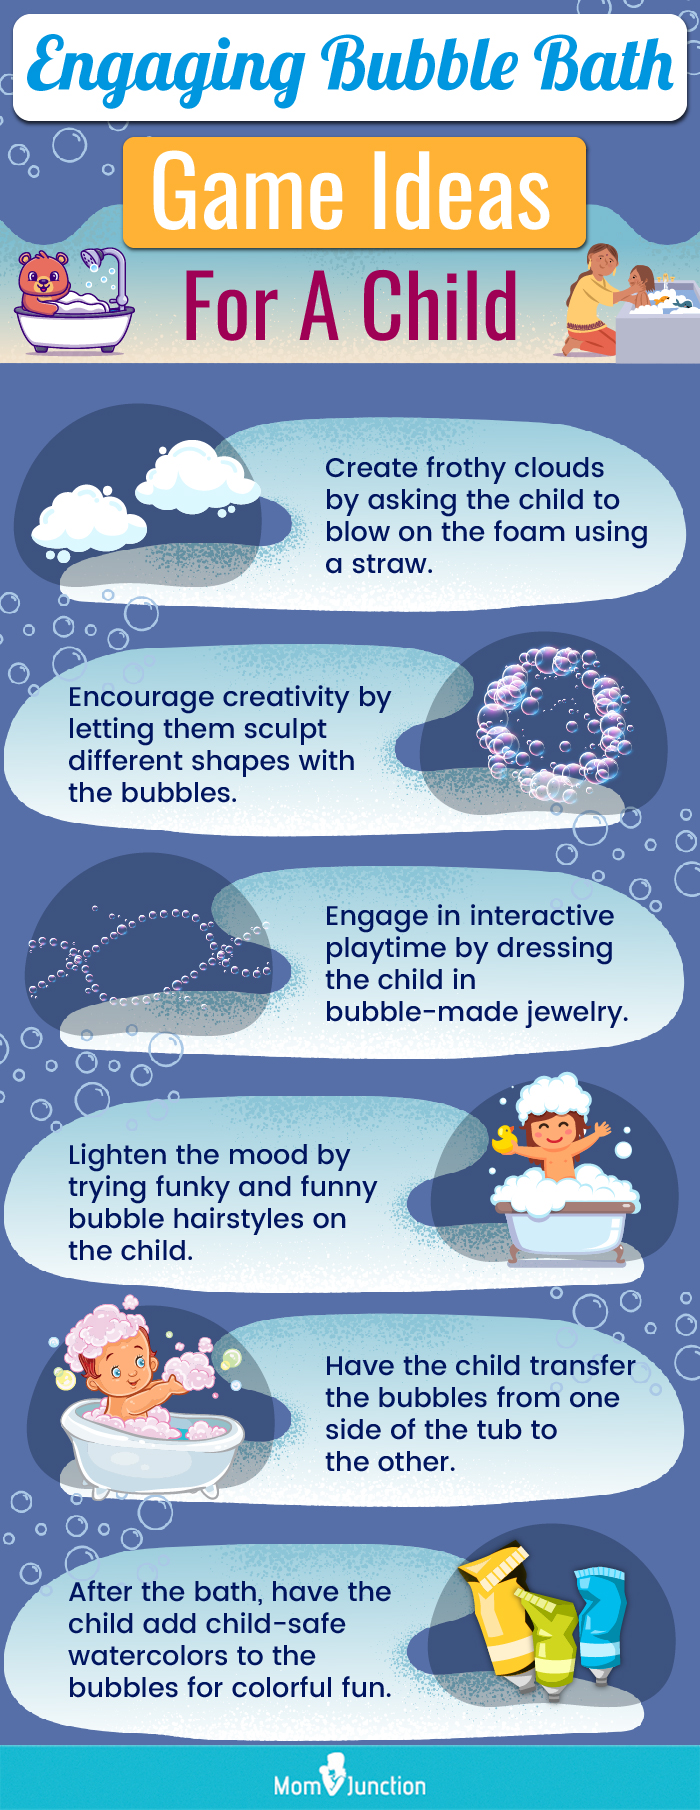 Engaging Bubble Bath Game Ideas For A Child (infographic)